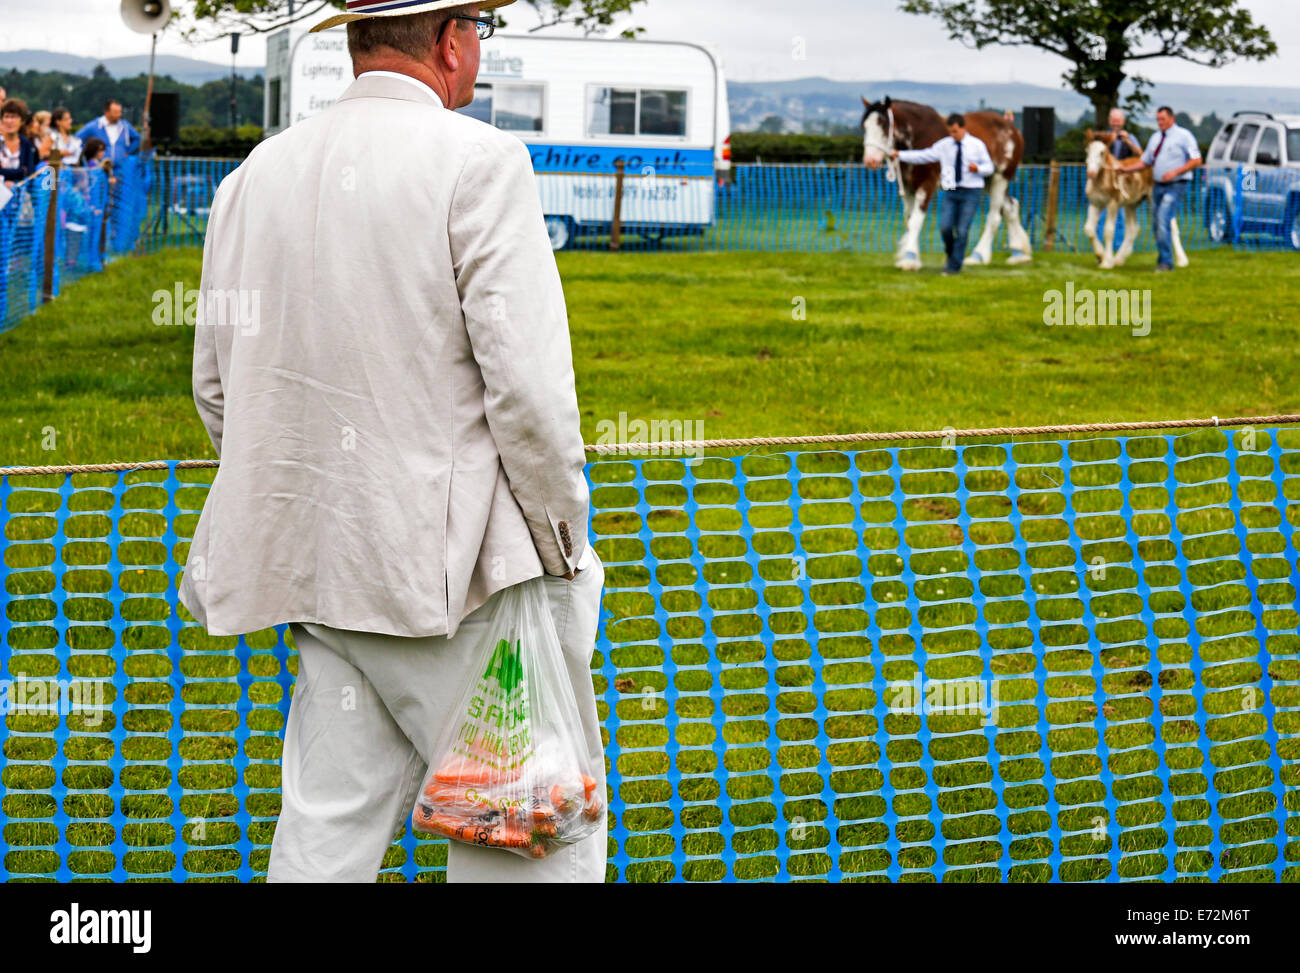 Man holding a bag of carrots watching a horse show at a country fair, near Glasgow, Scotland, UK Stock Photo